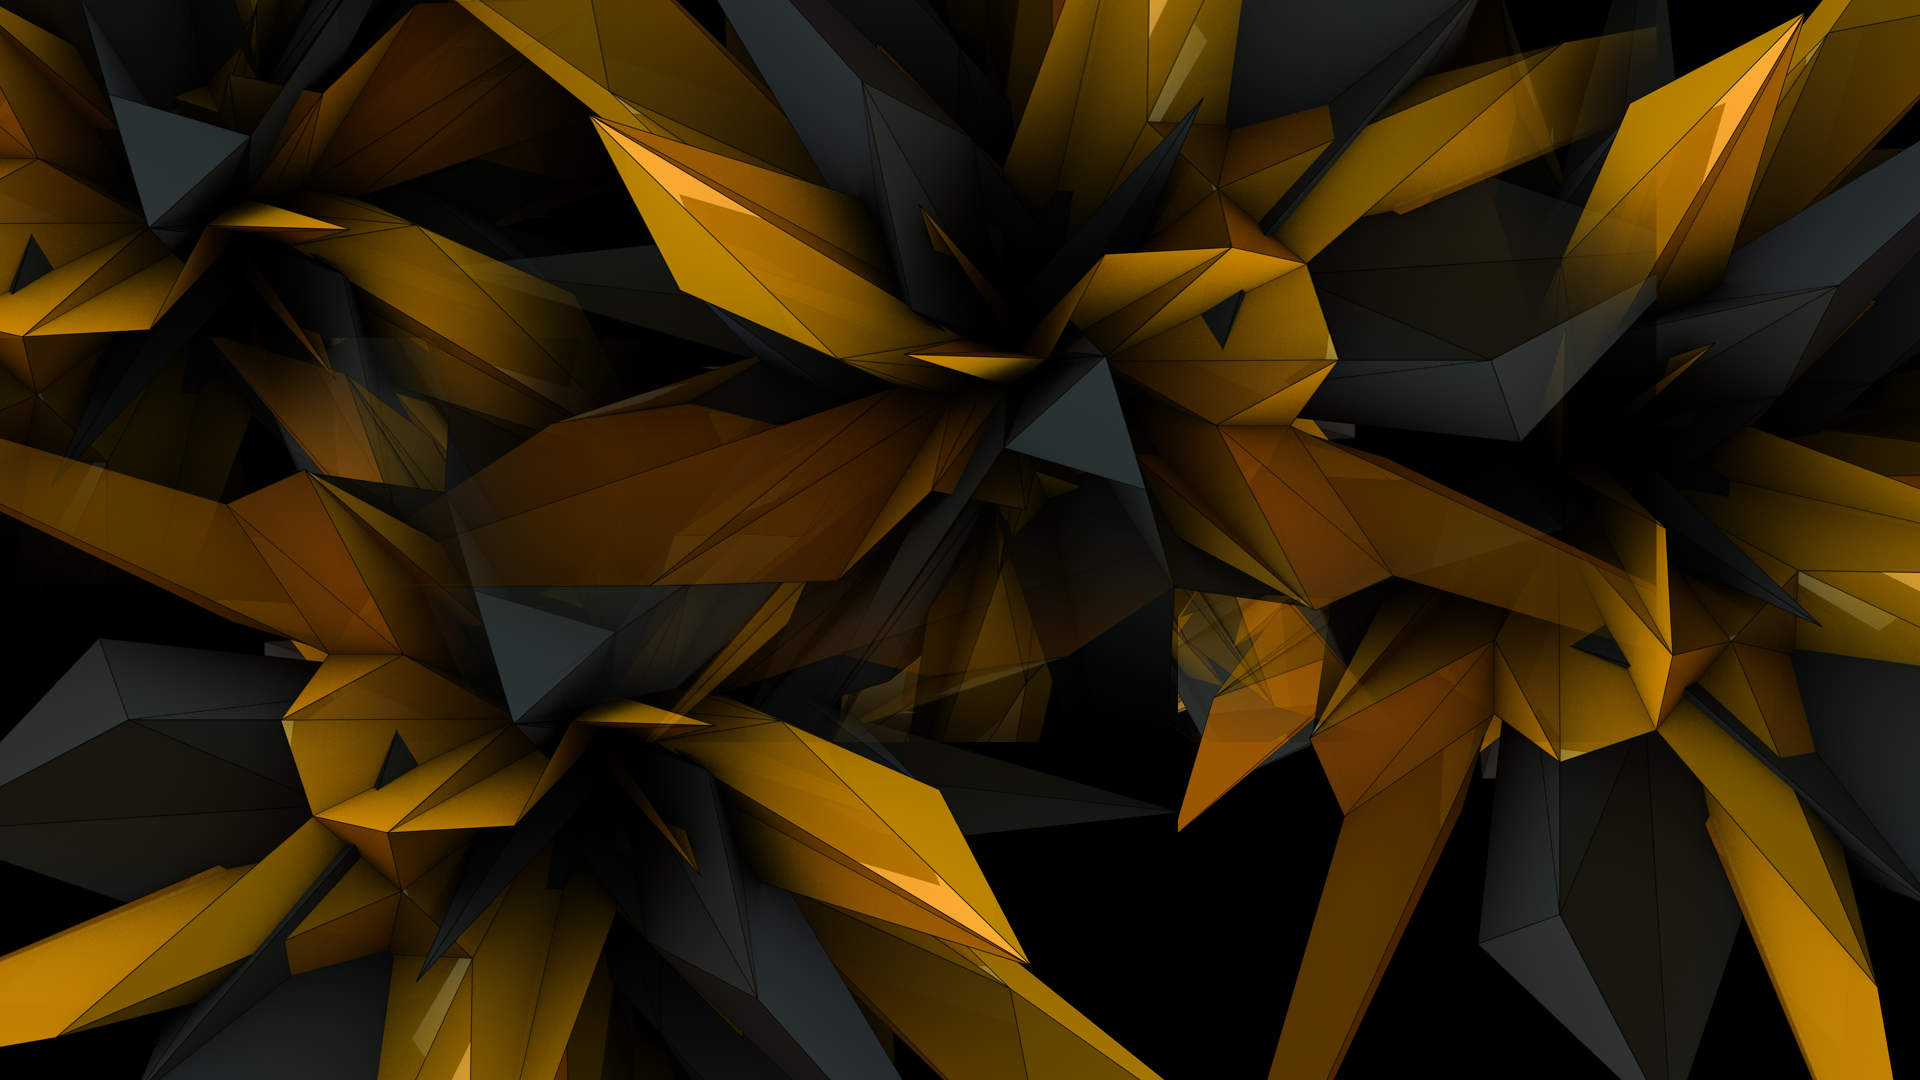  Black  and Gold  Abstract HD Wallpaper  Background Image 